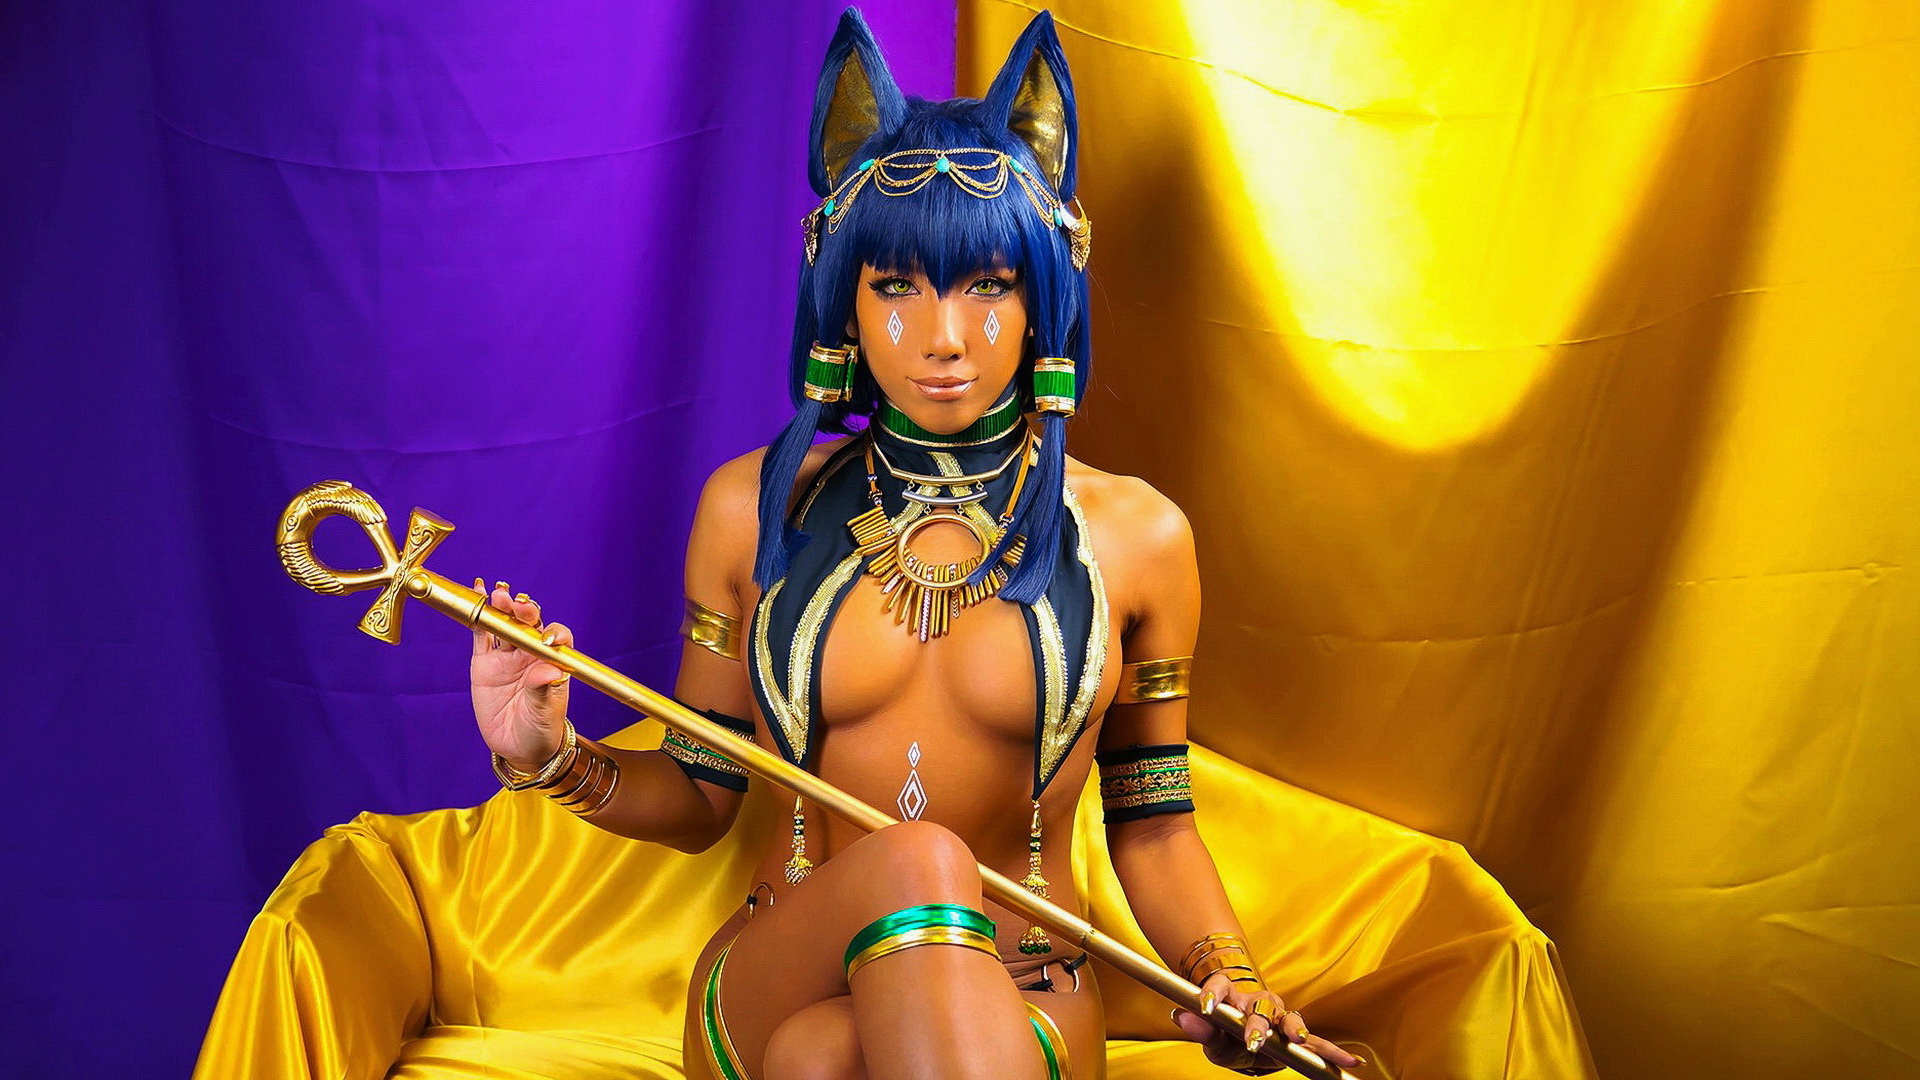 Free photo Cosplay the capricious Egyptian goddess Bastet sits on her throne